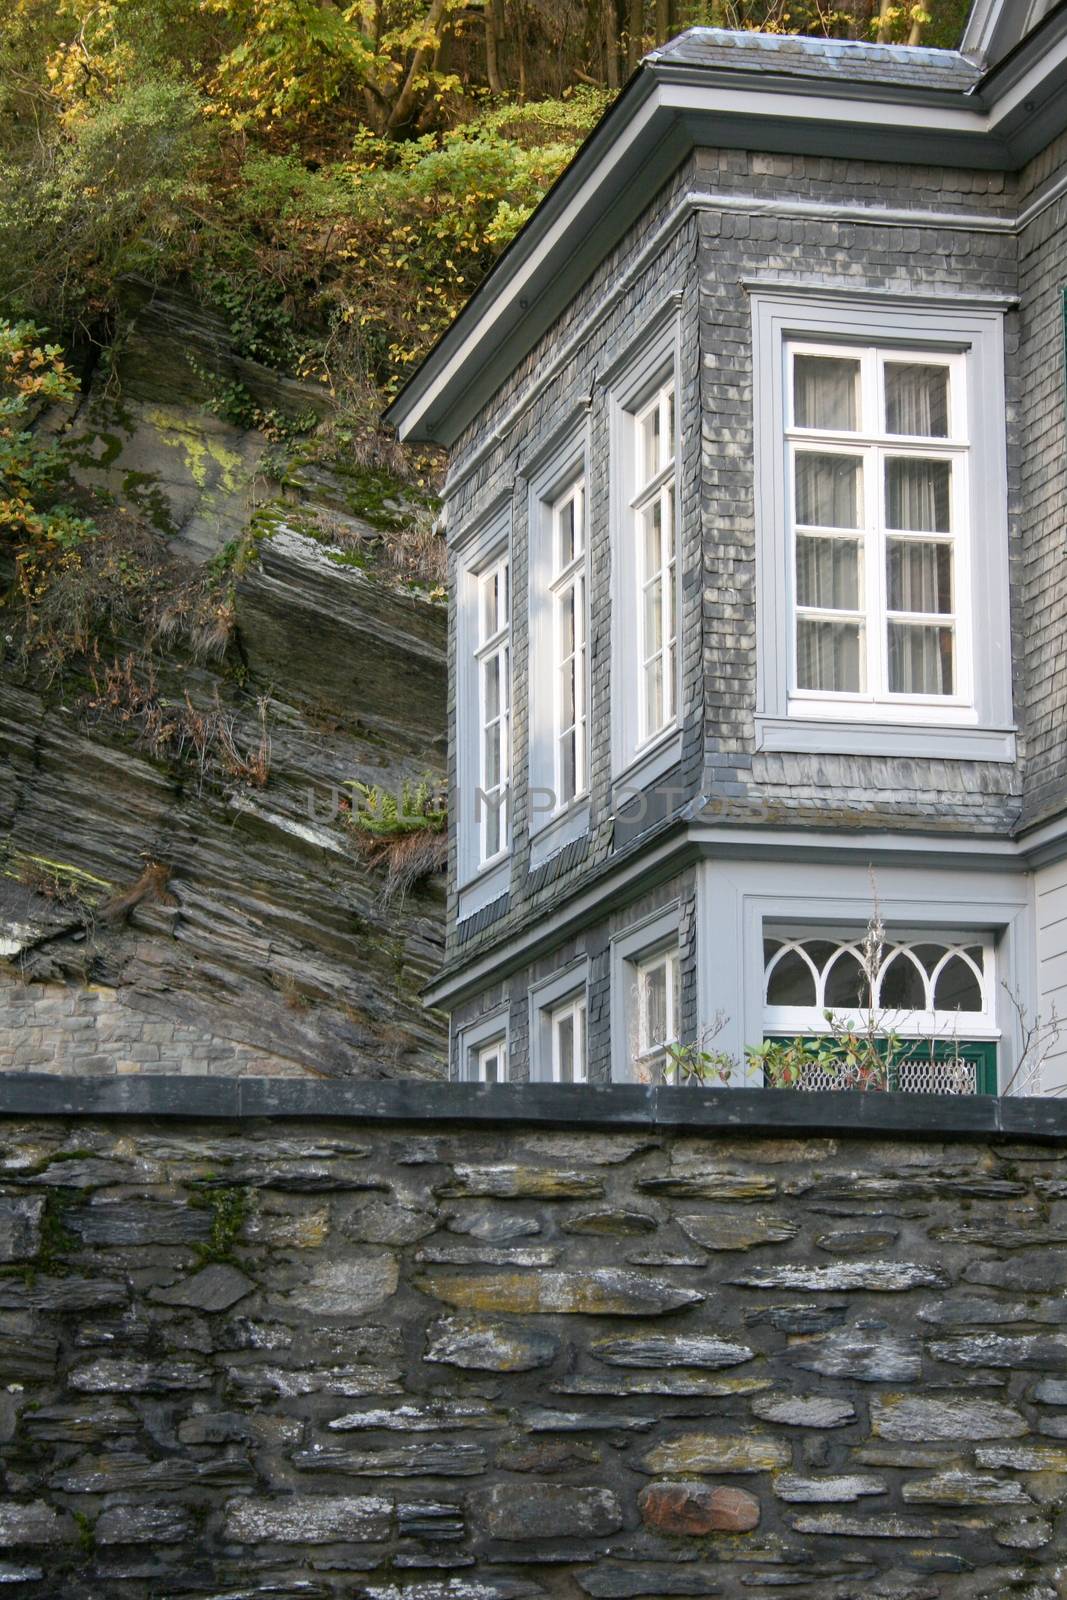 A high stone wall with house corner